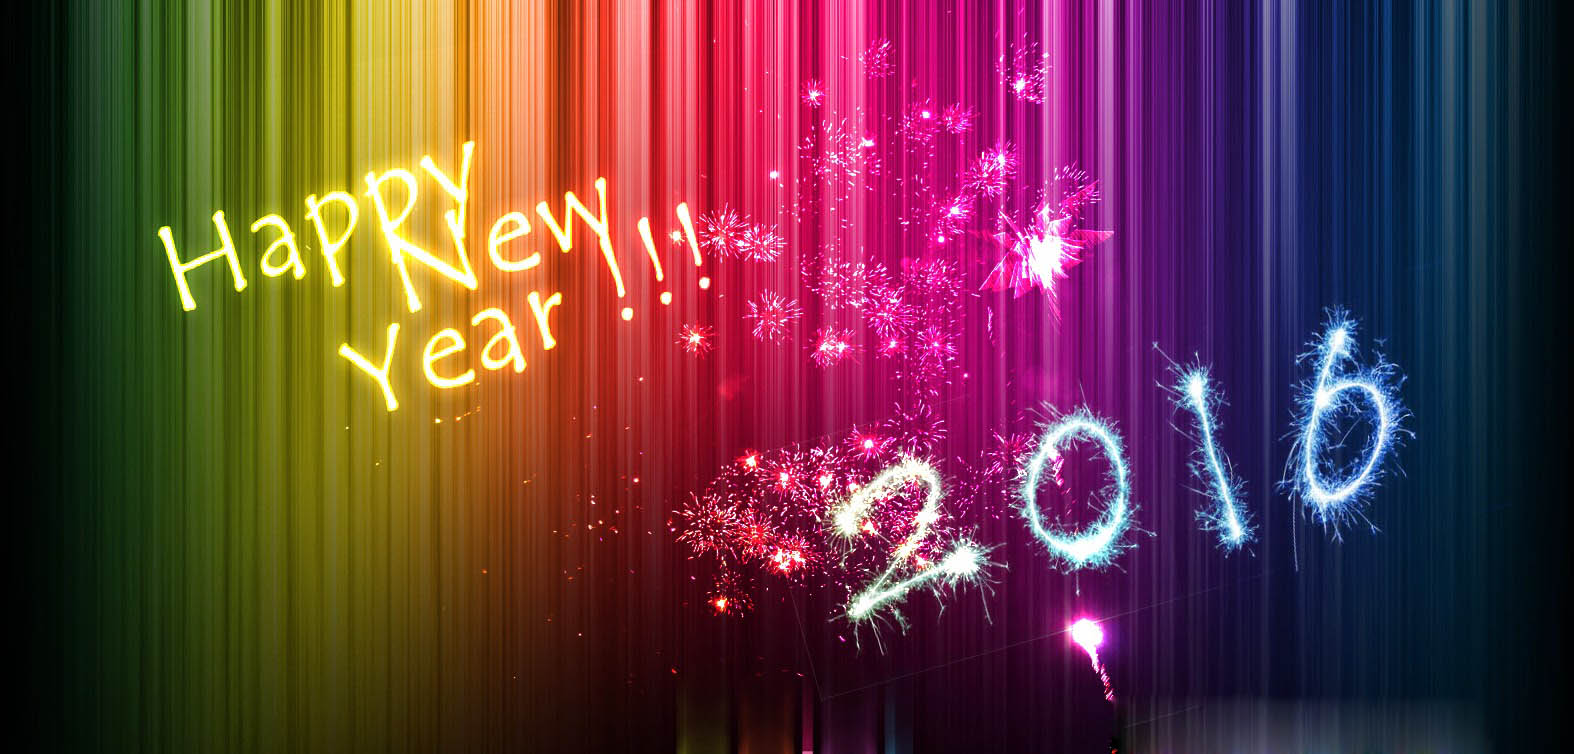 Happy New Year 2016 Colorful Background Wallpaper